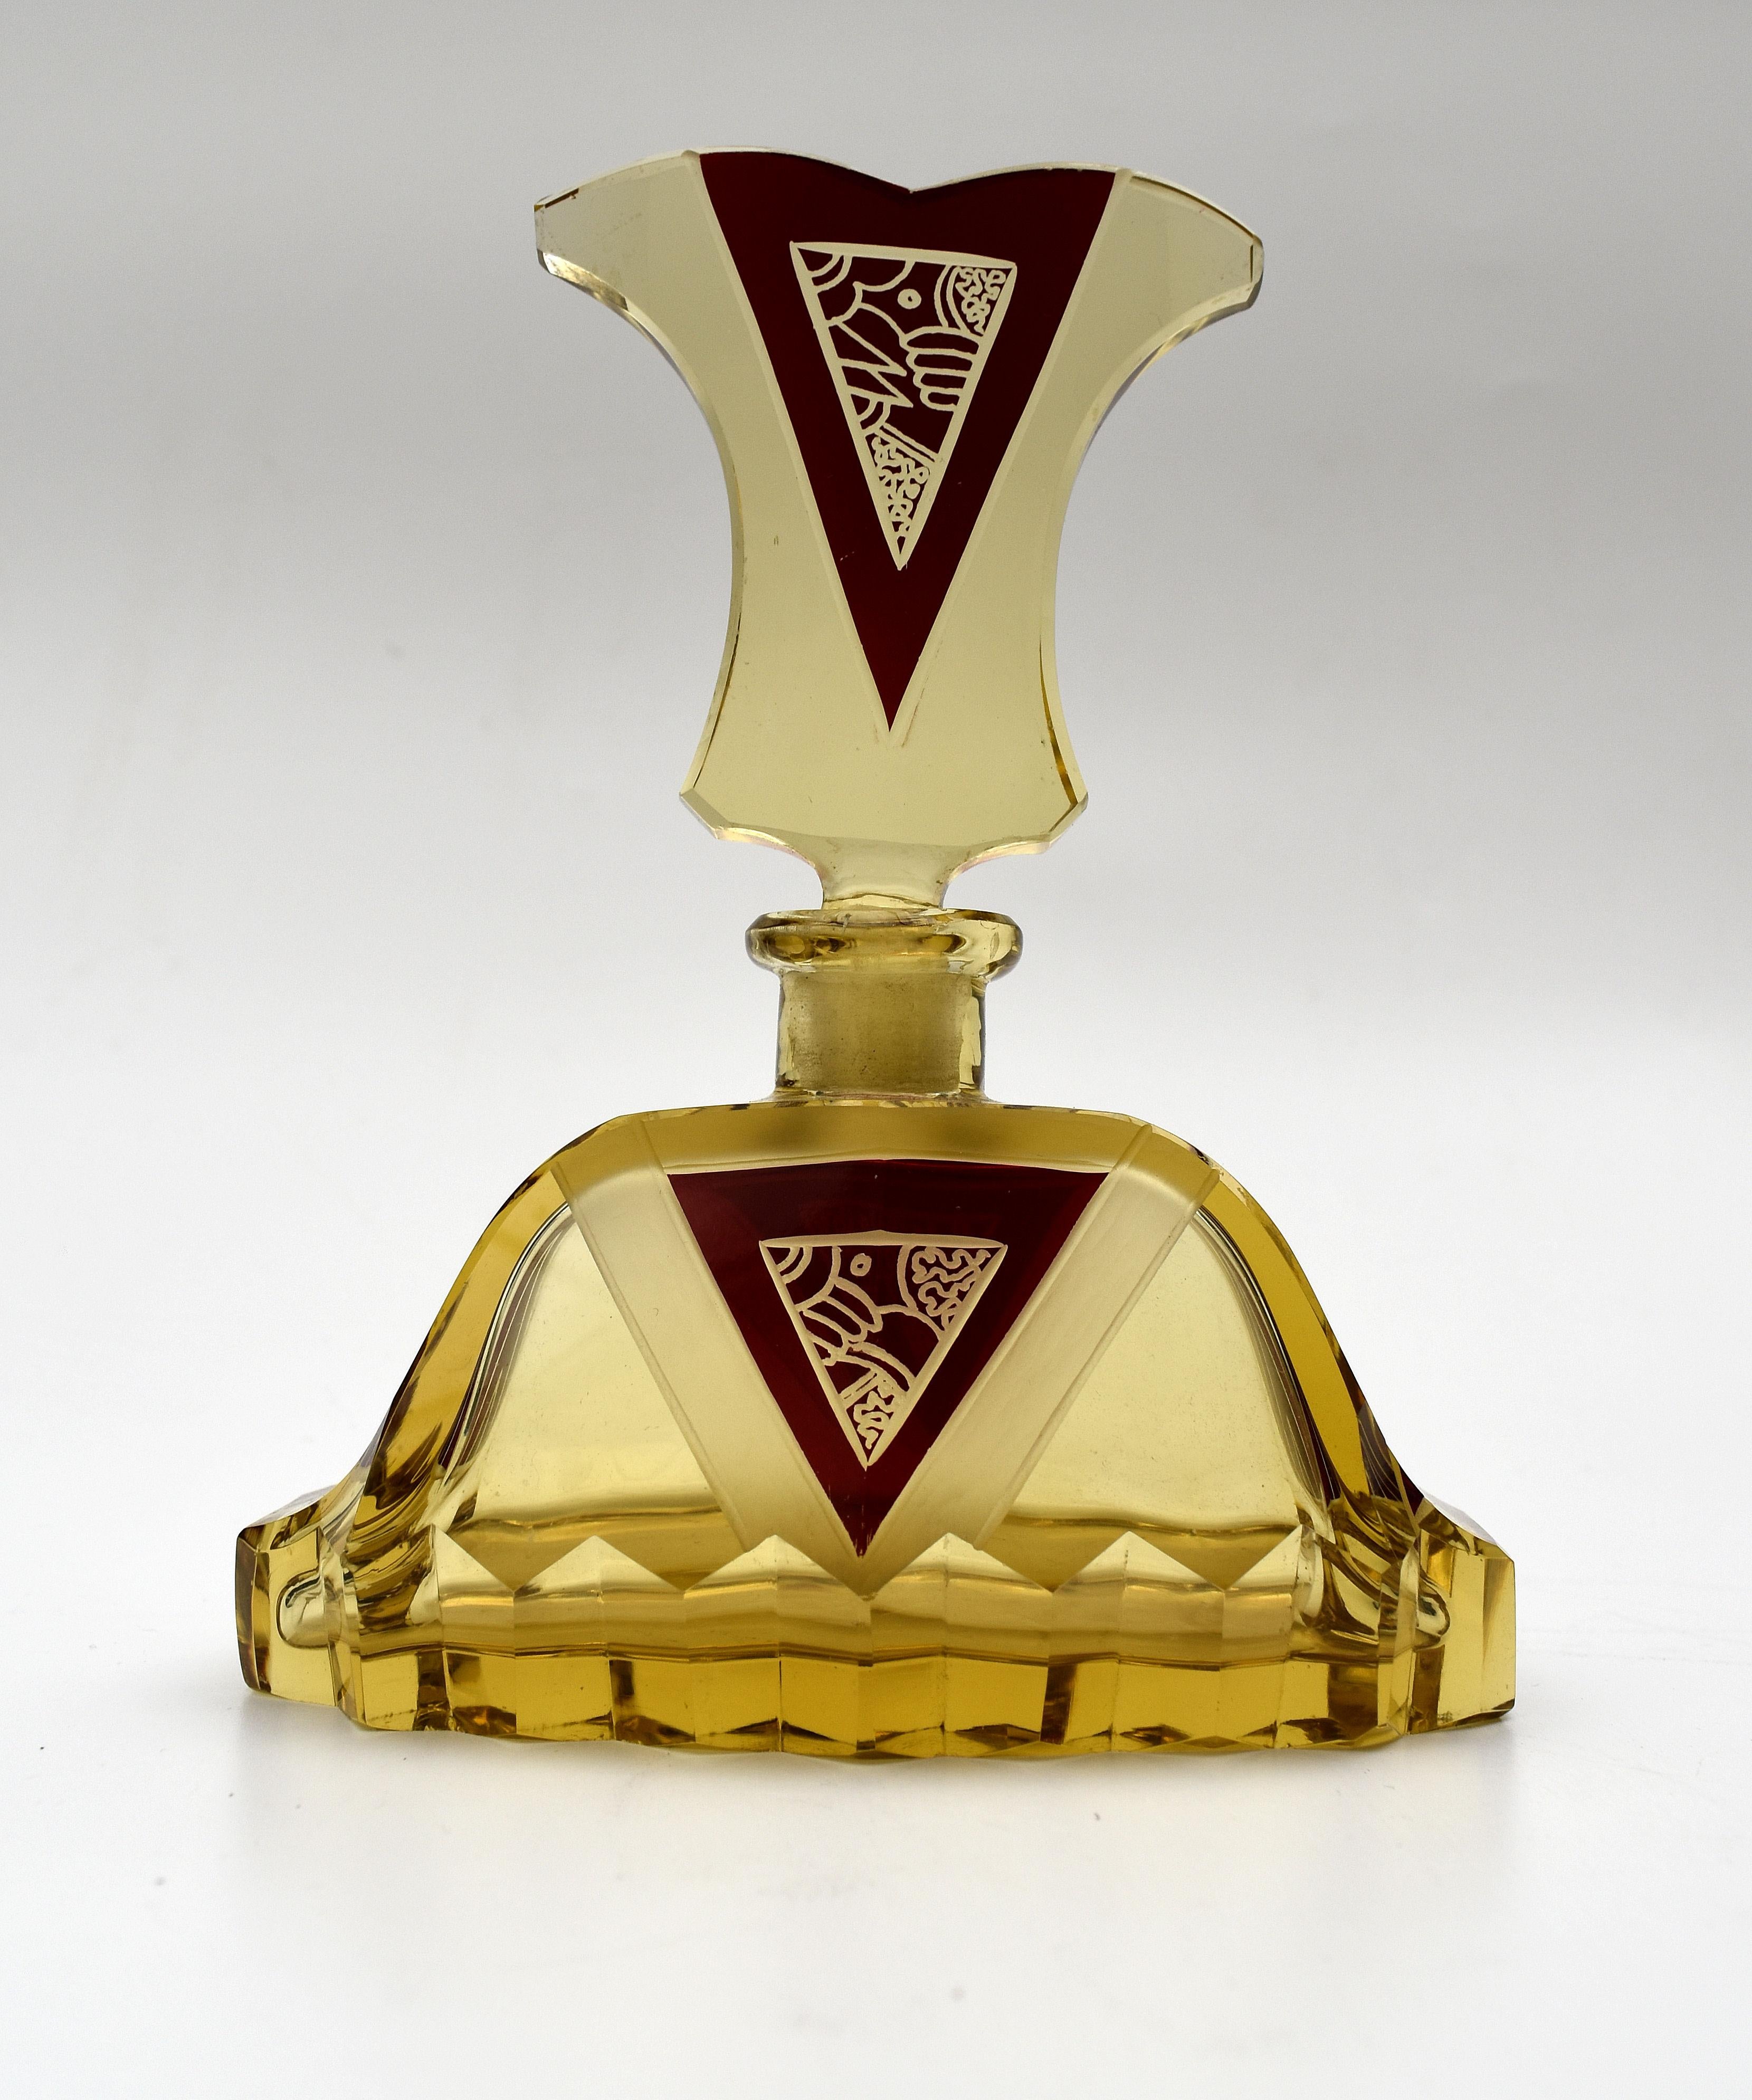 Cut Glass Art Deco Amber Coloured Glass Perfume Bottle by Karl Palda, c1930s For Sale